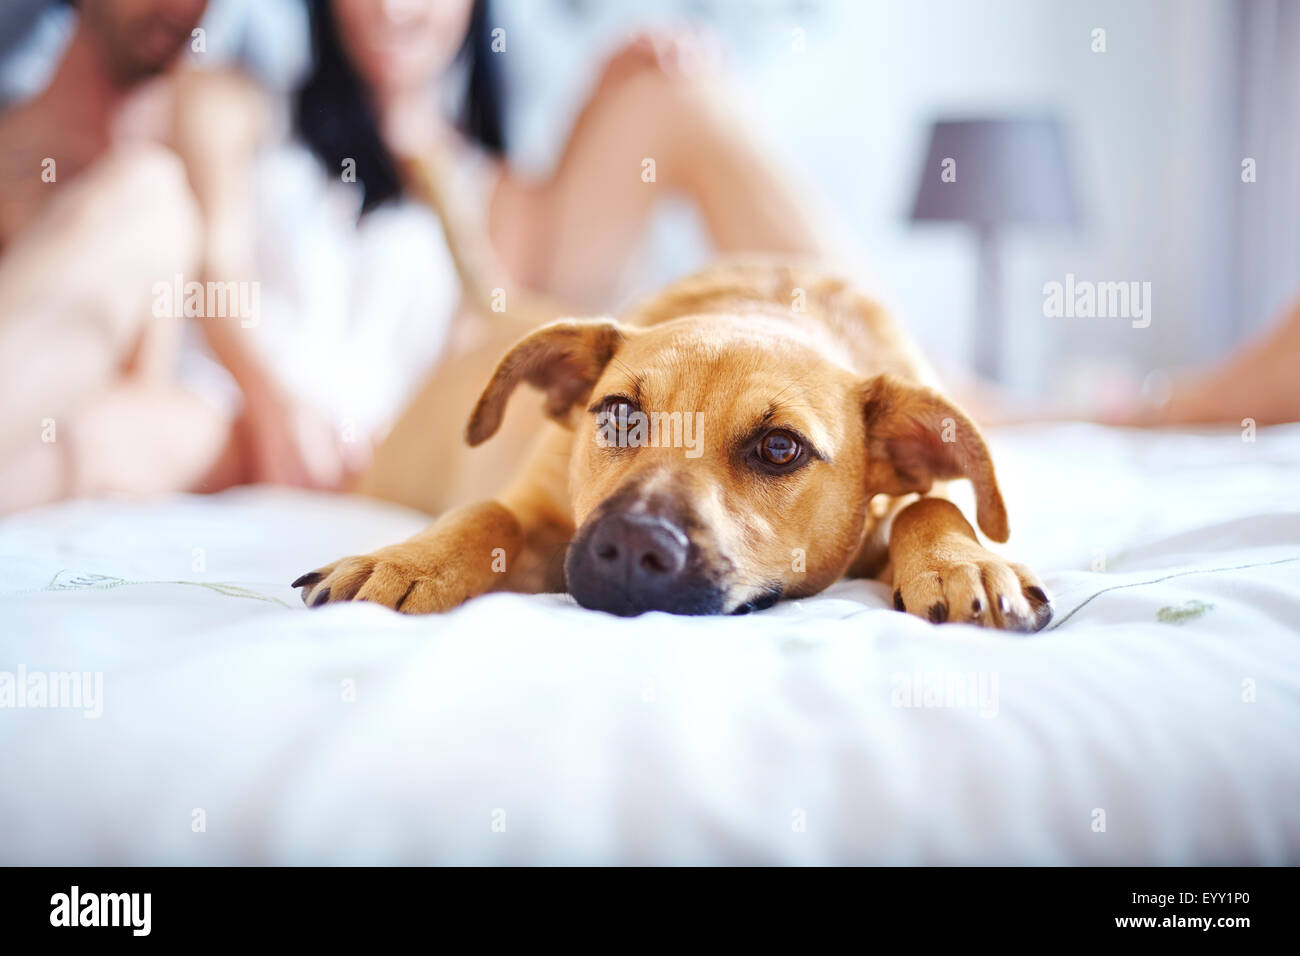 Cute dog laying on bed Stock Photo